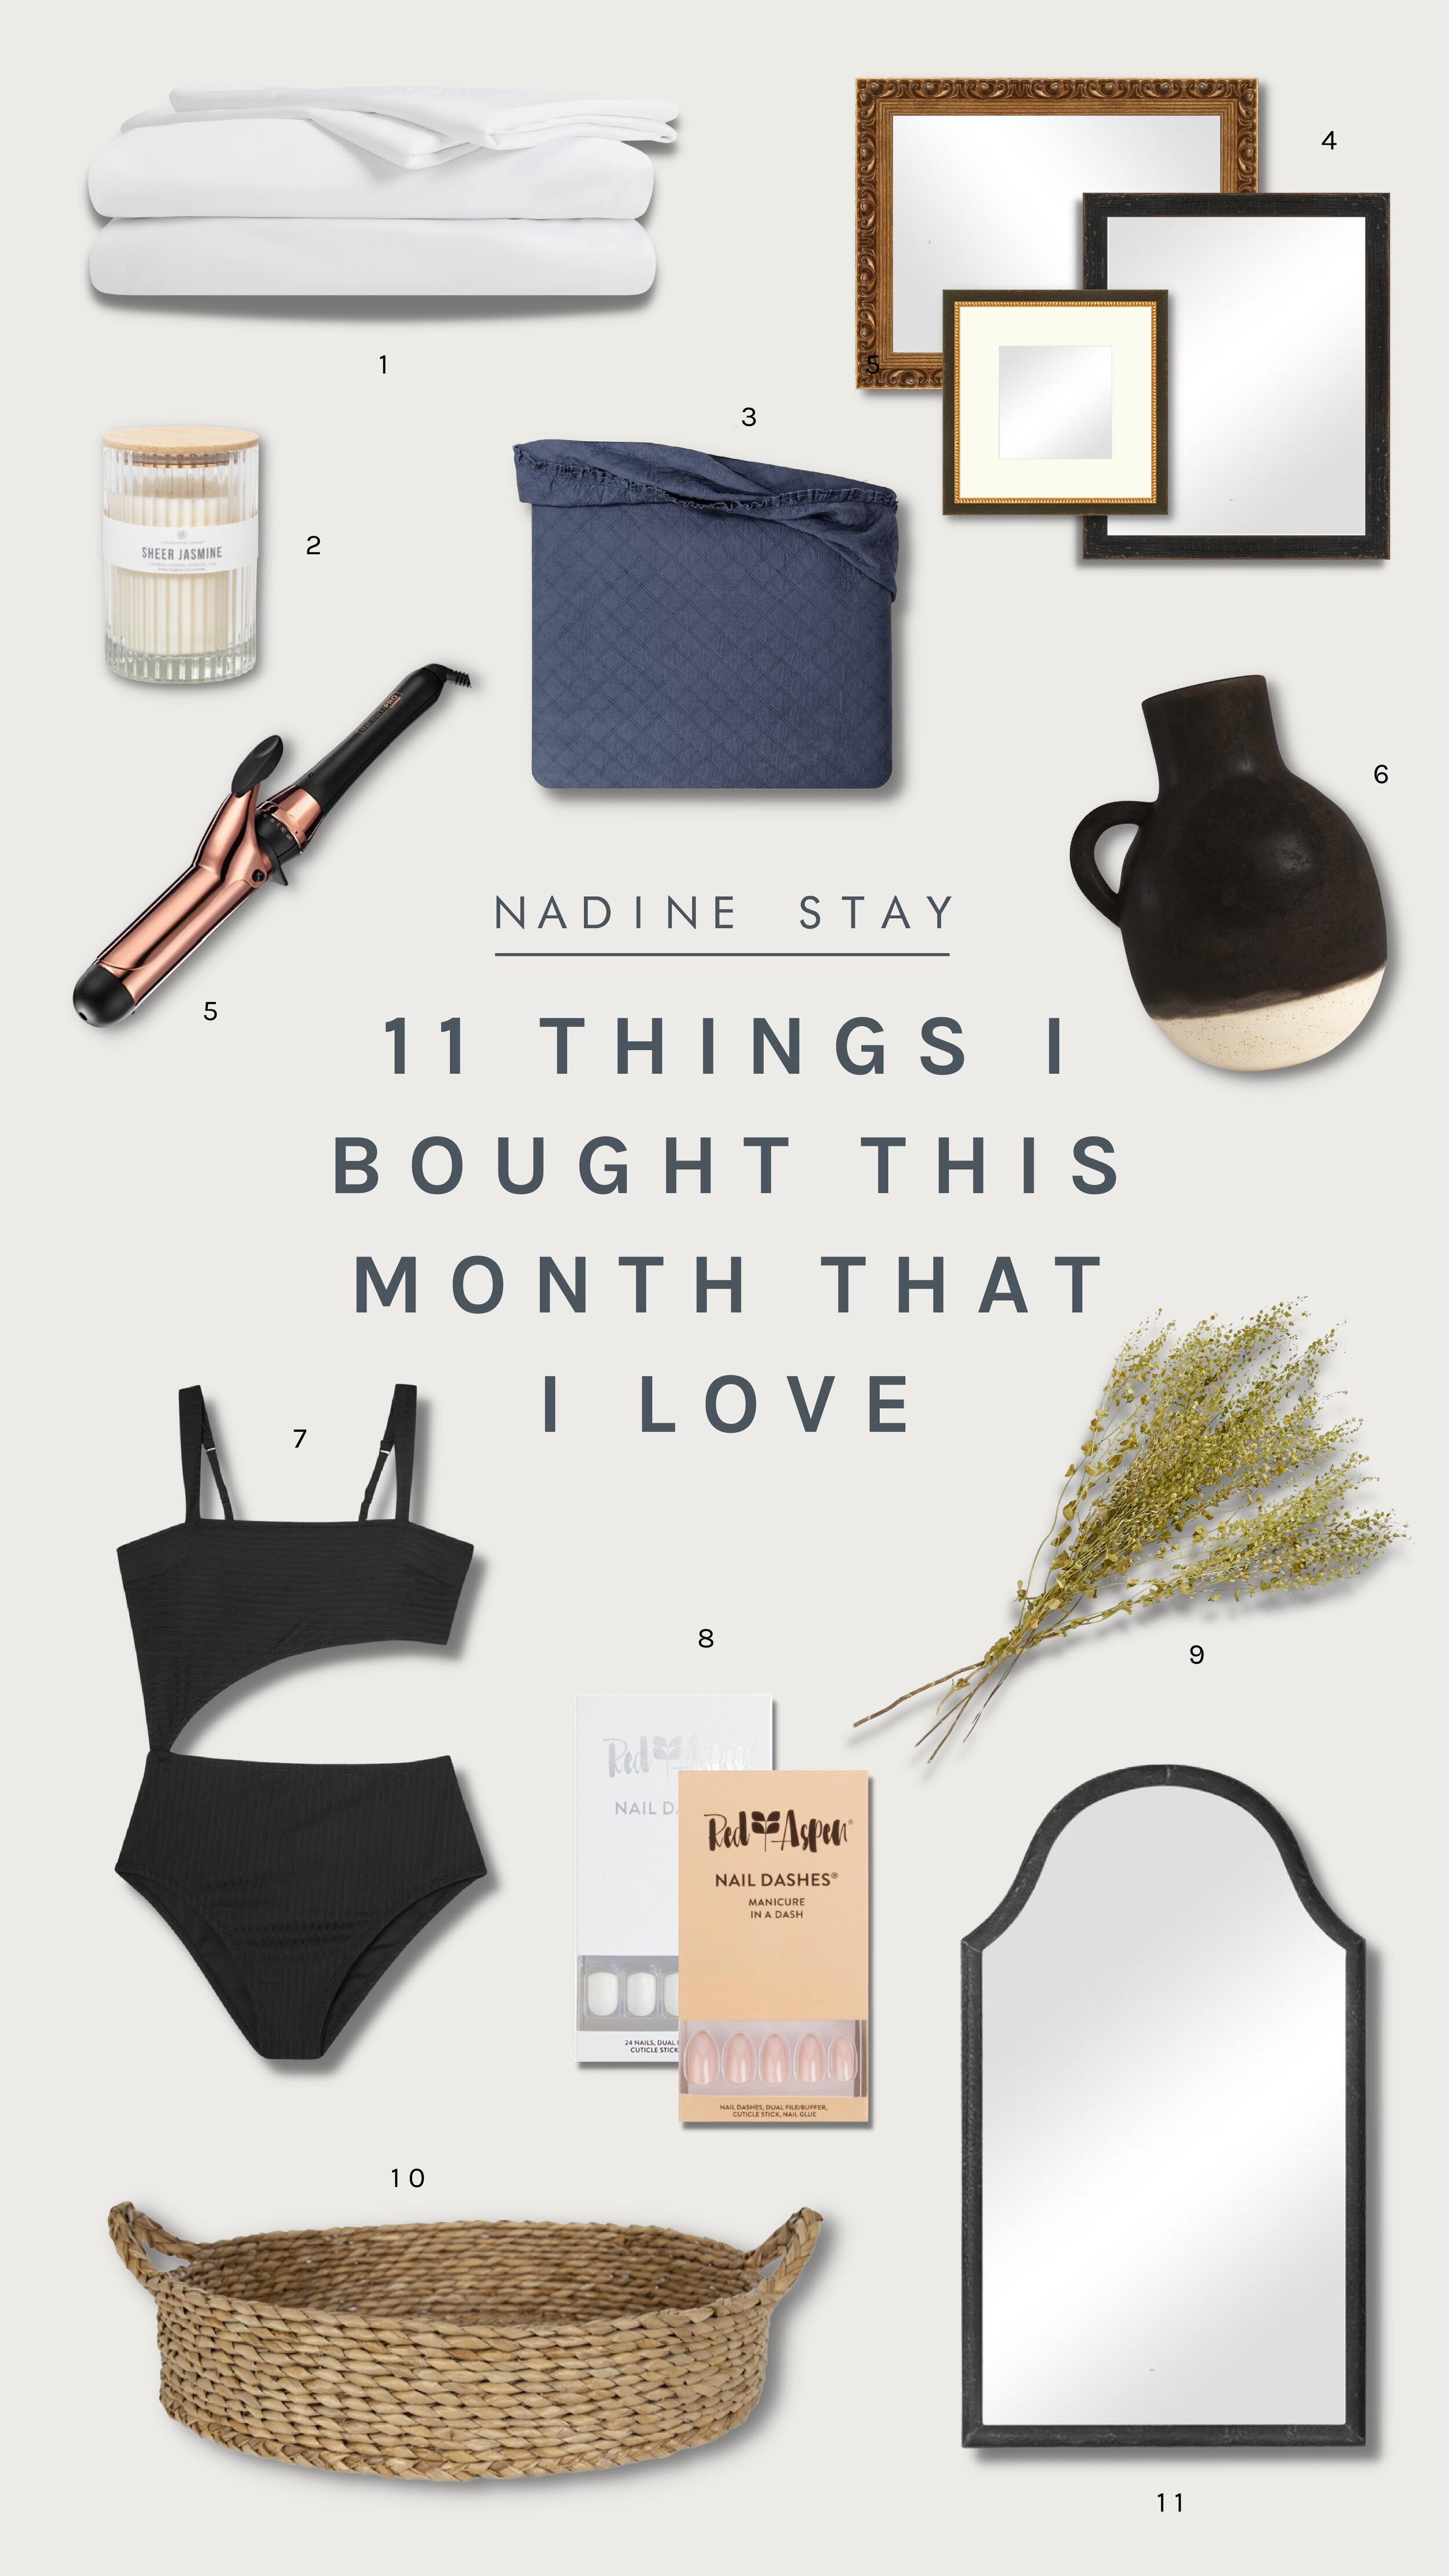 11 Things I Bought This Month That I'm Loving - Nadine Stay | Home decor finds, bedding staples, antique arched mirror, dried florals I love, swimwear, my favorite glue on nails, a new custom frame shop, and beauty favorites.